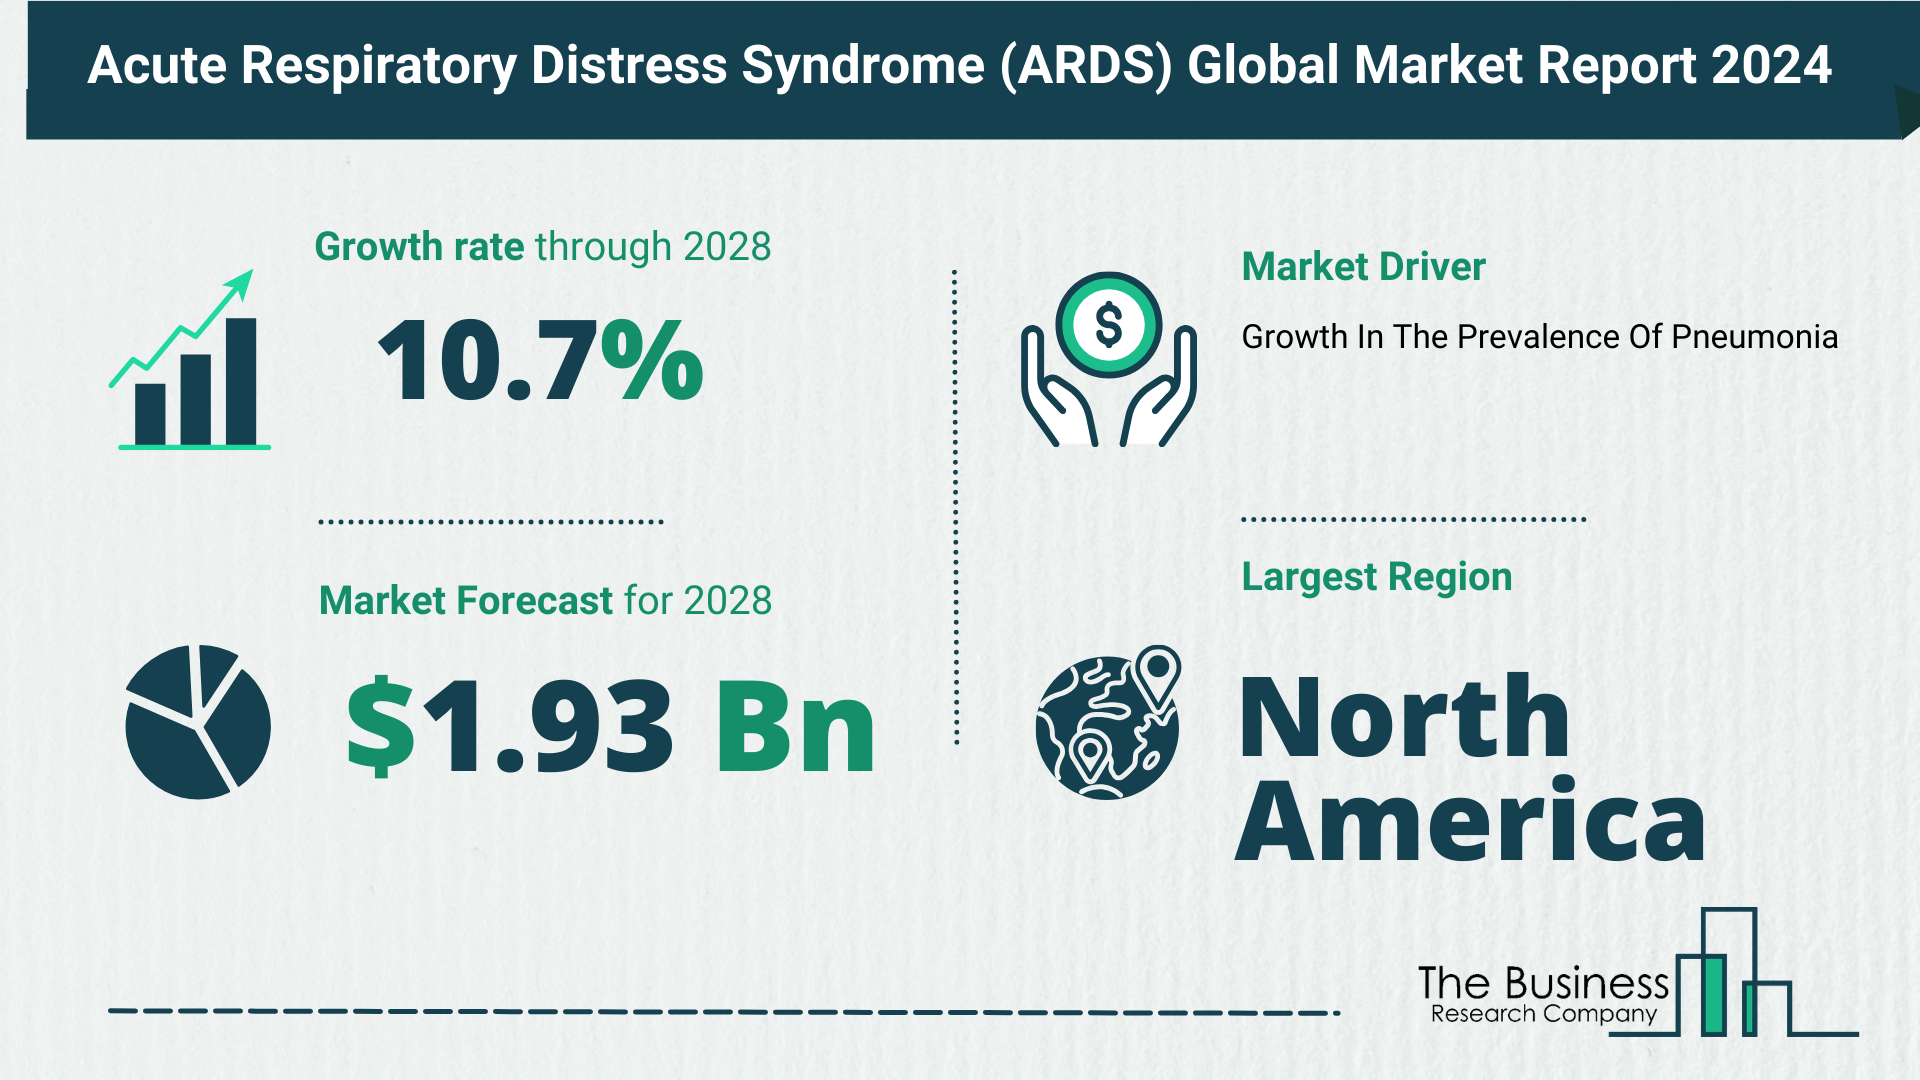 Global Acute Respiratory Distress Syndrome (ARDS) Market